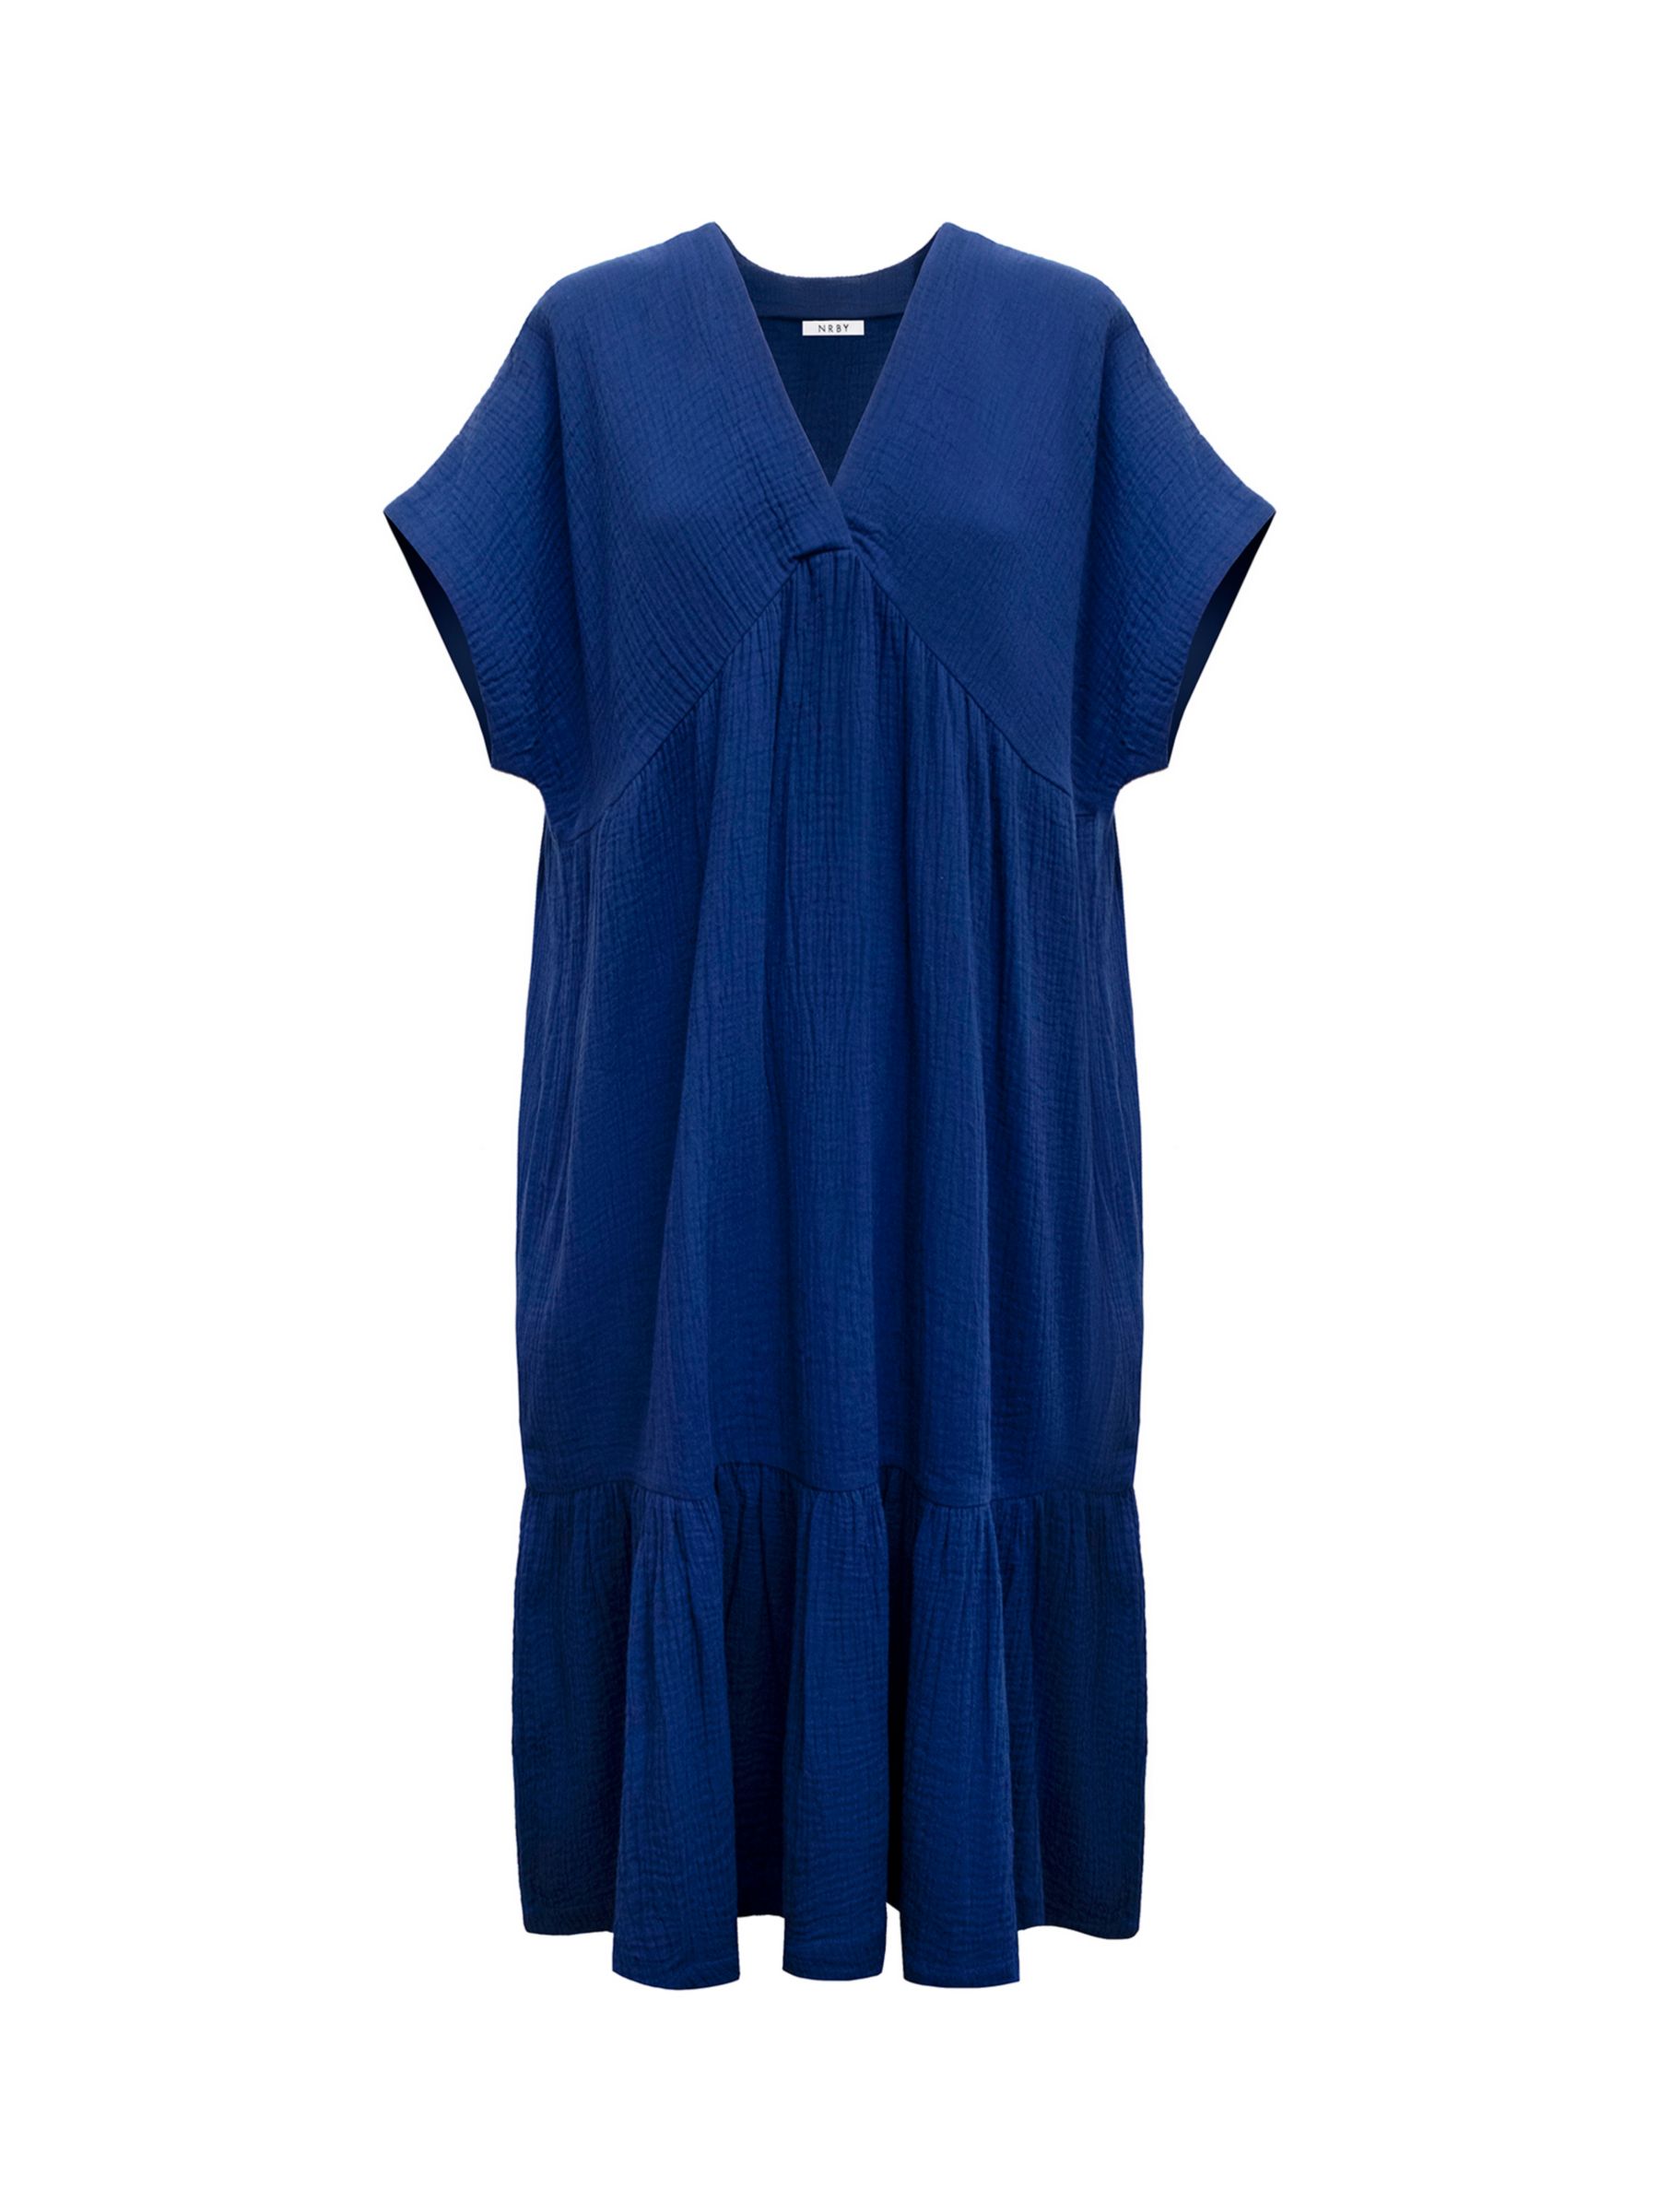 NRBY Gia Double Cloth Tiered Dress, Navy, XS